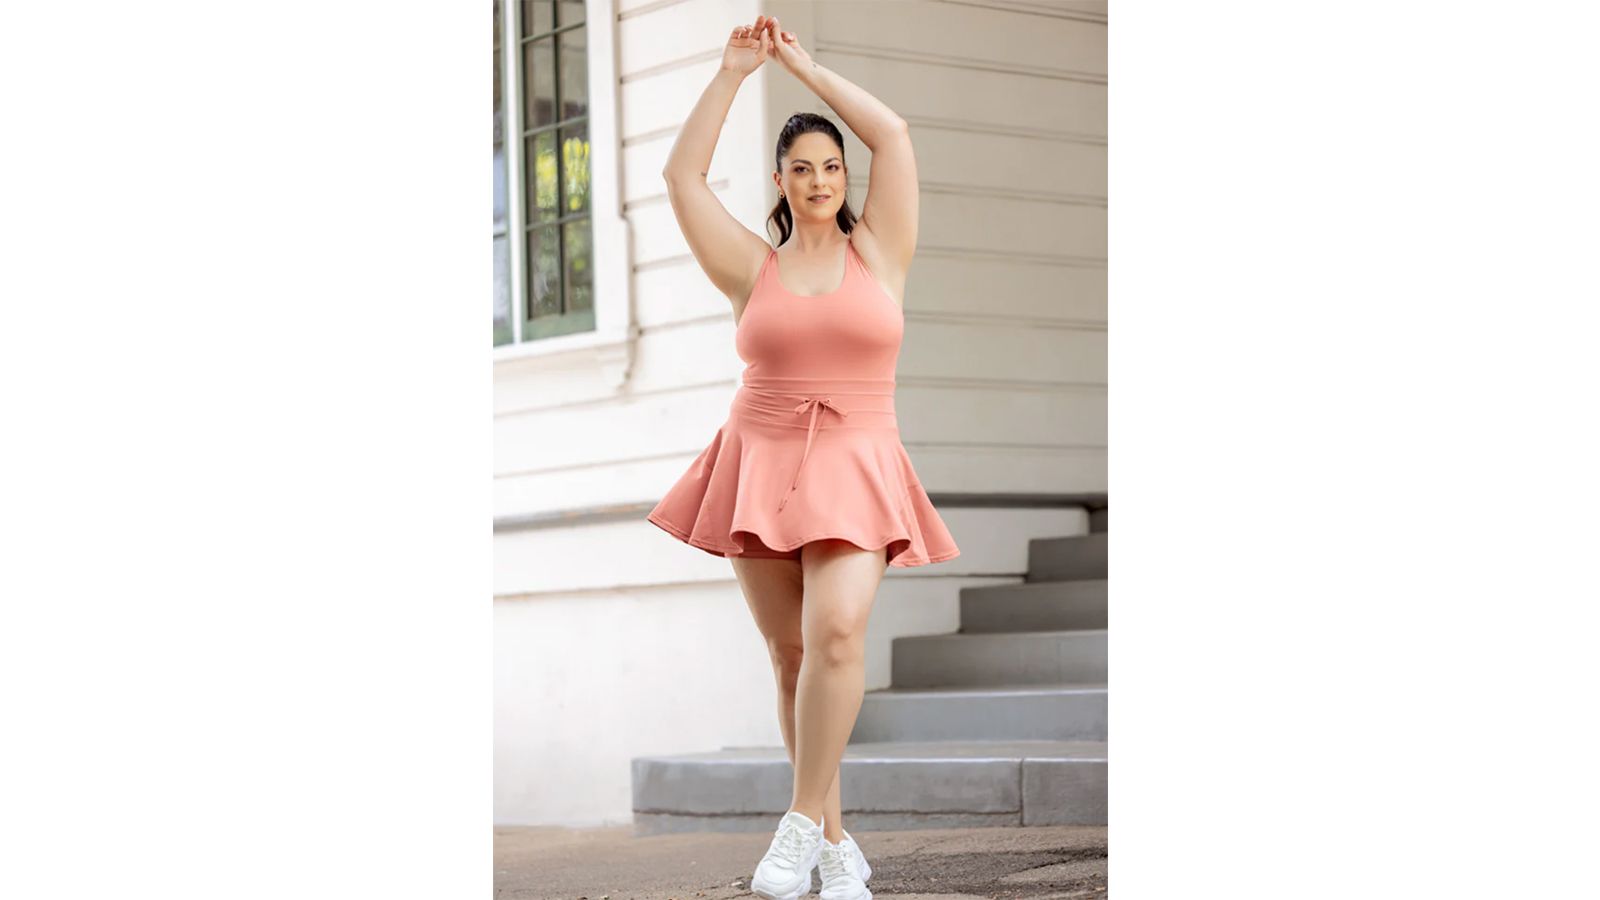 7 Best Exercise Dresses to Buy in 2022 - Best Workout Dresses